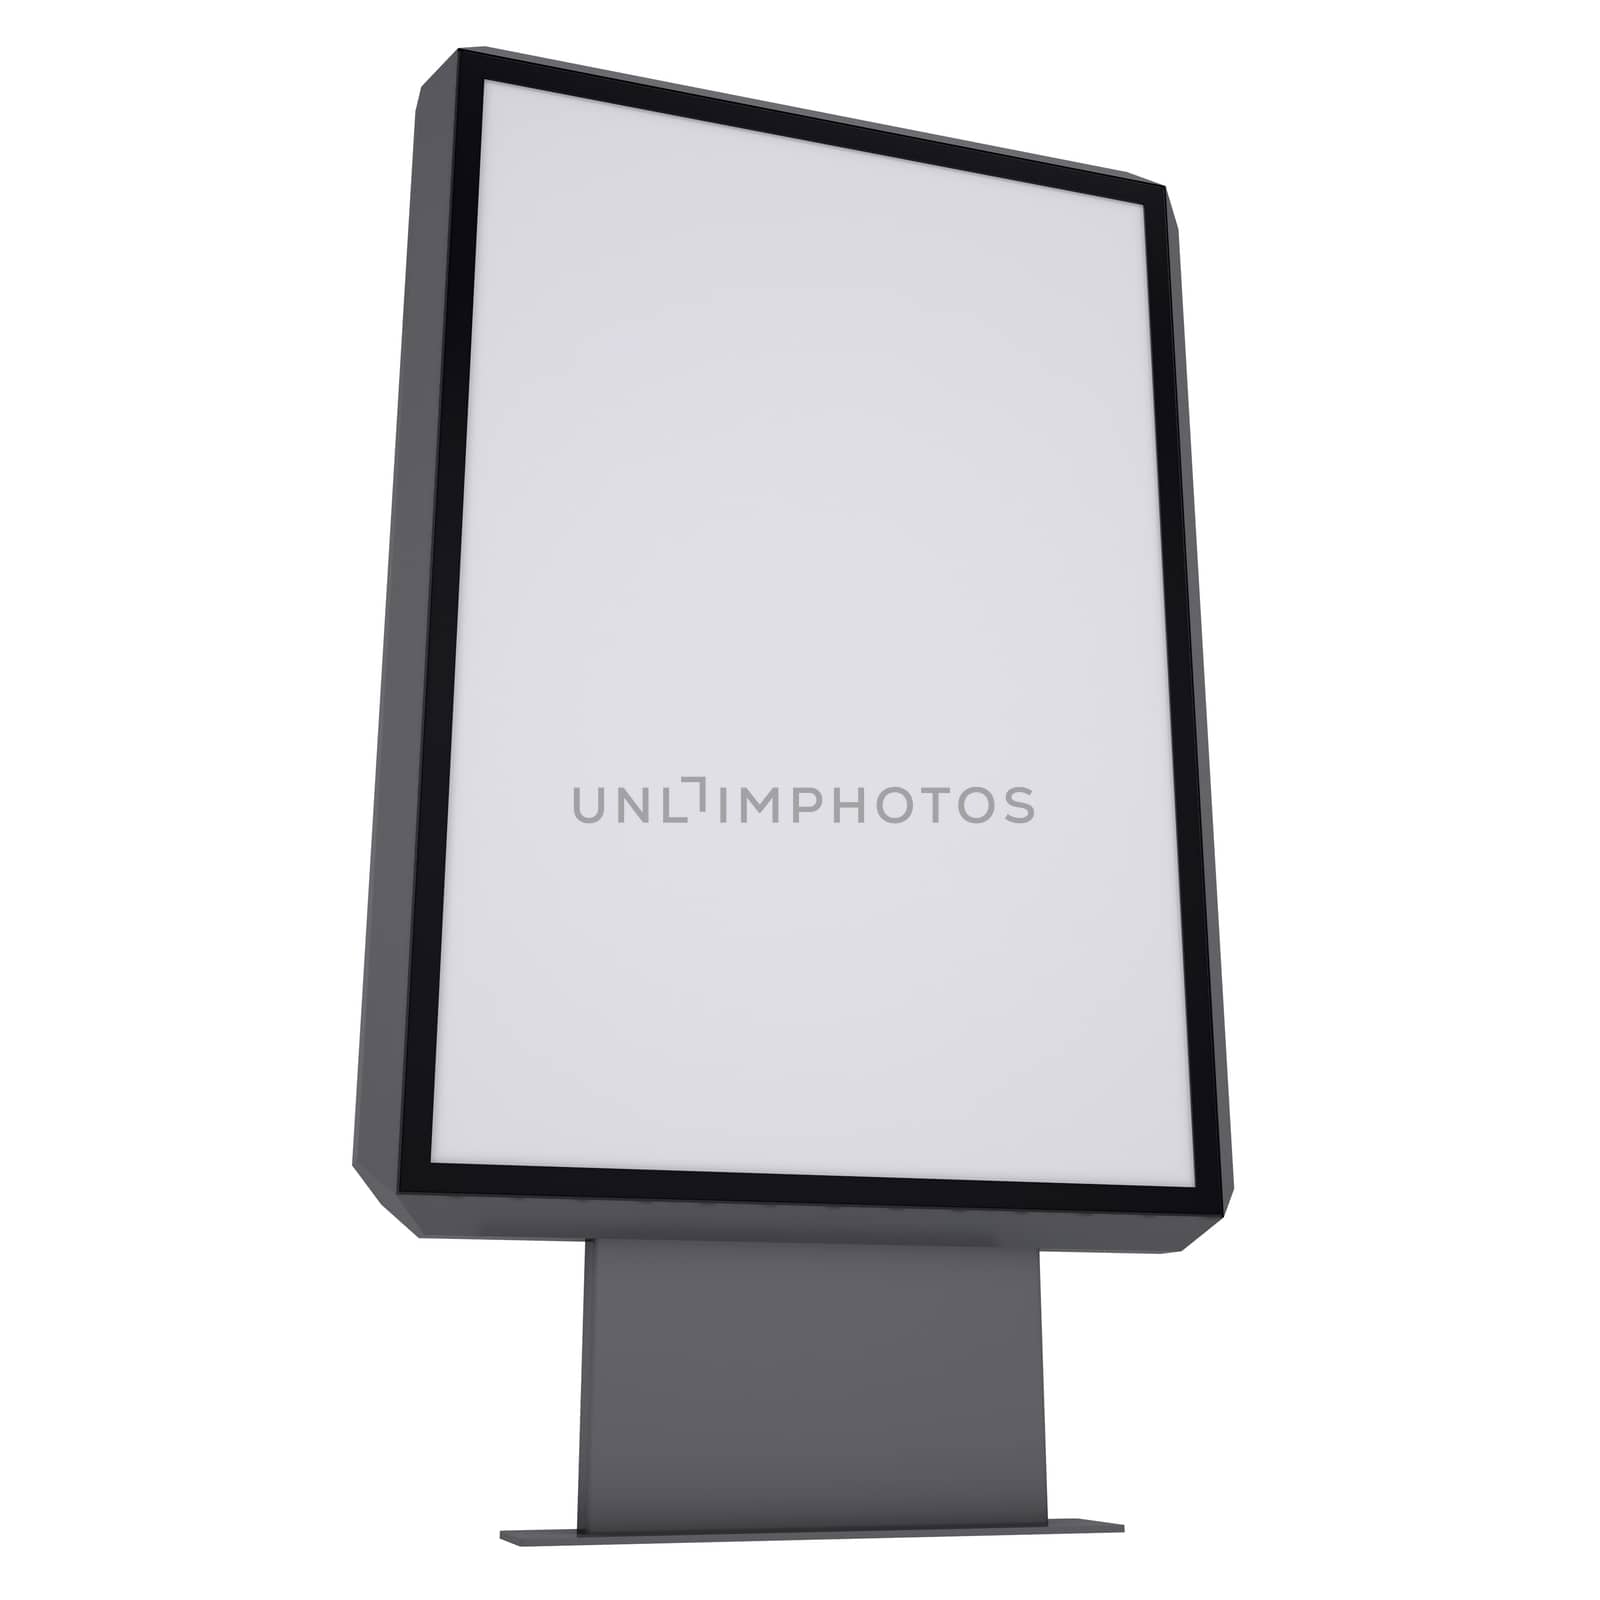 Advertising stand. Isolated render on a white background